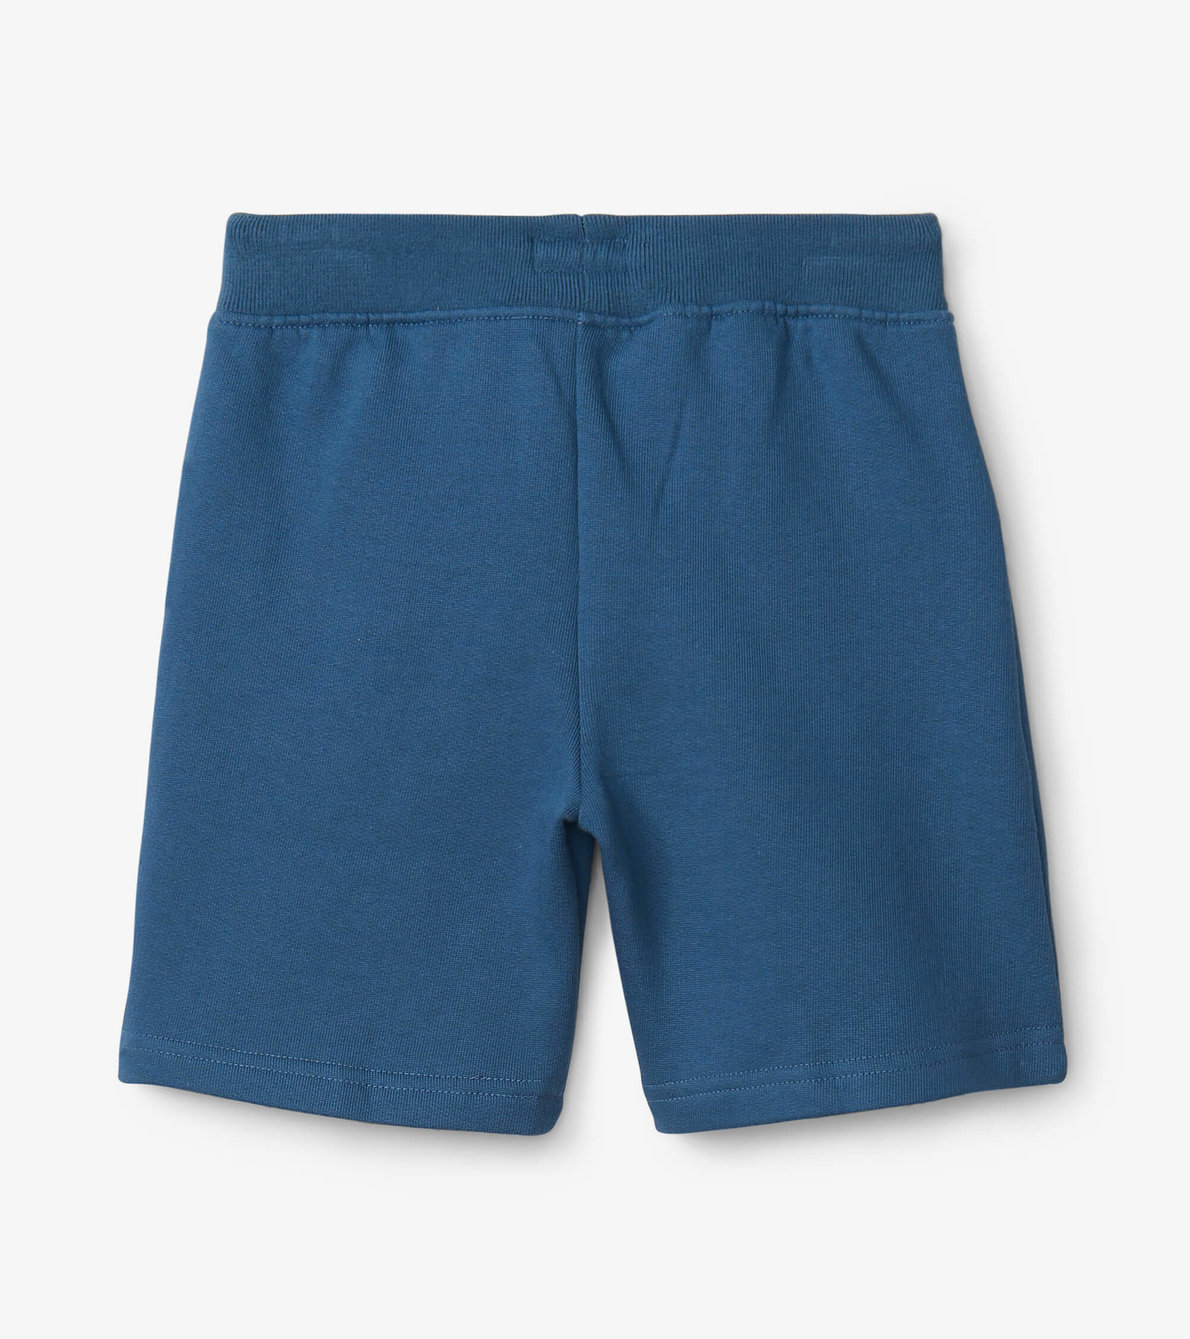 View larger image of Ensign Blue Terry Shorts